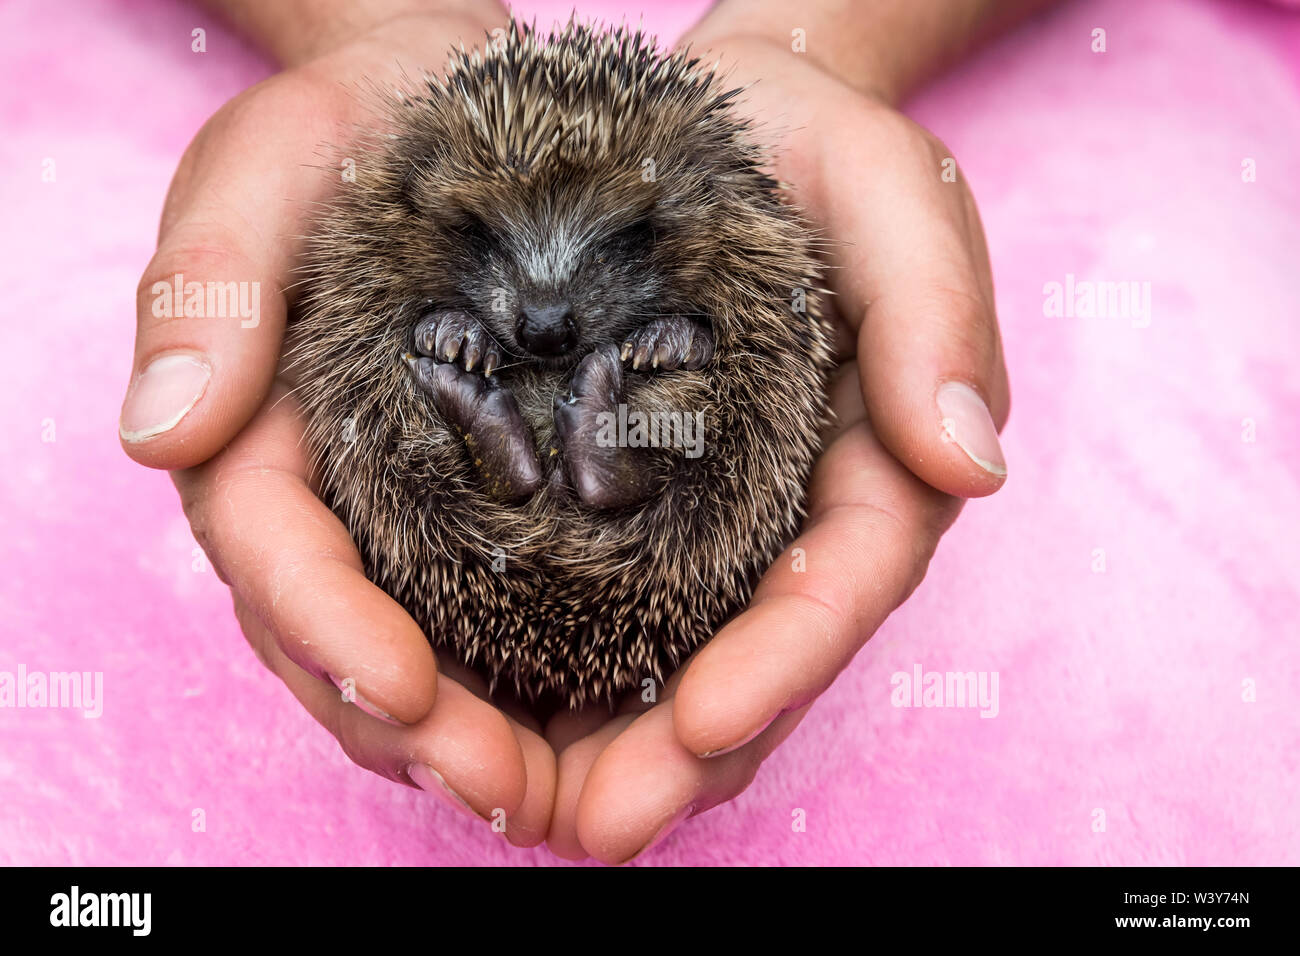 Hedgehog, (Scientific name: Erinaceus Europaeus)  a cute, tiny, wild, native, baby hoglet being cupped in human hands.  Facing forward. Close up. Stock Photo